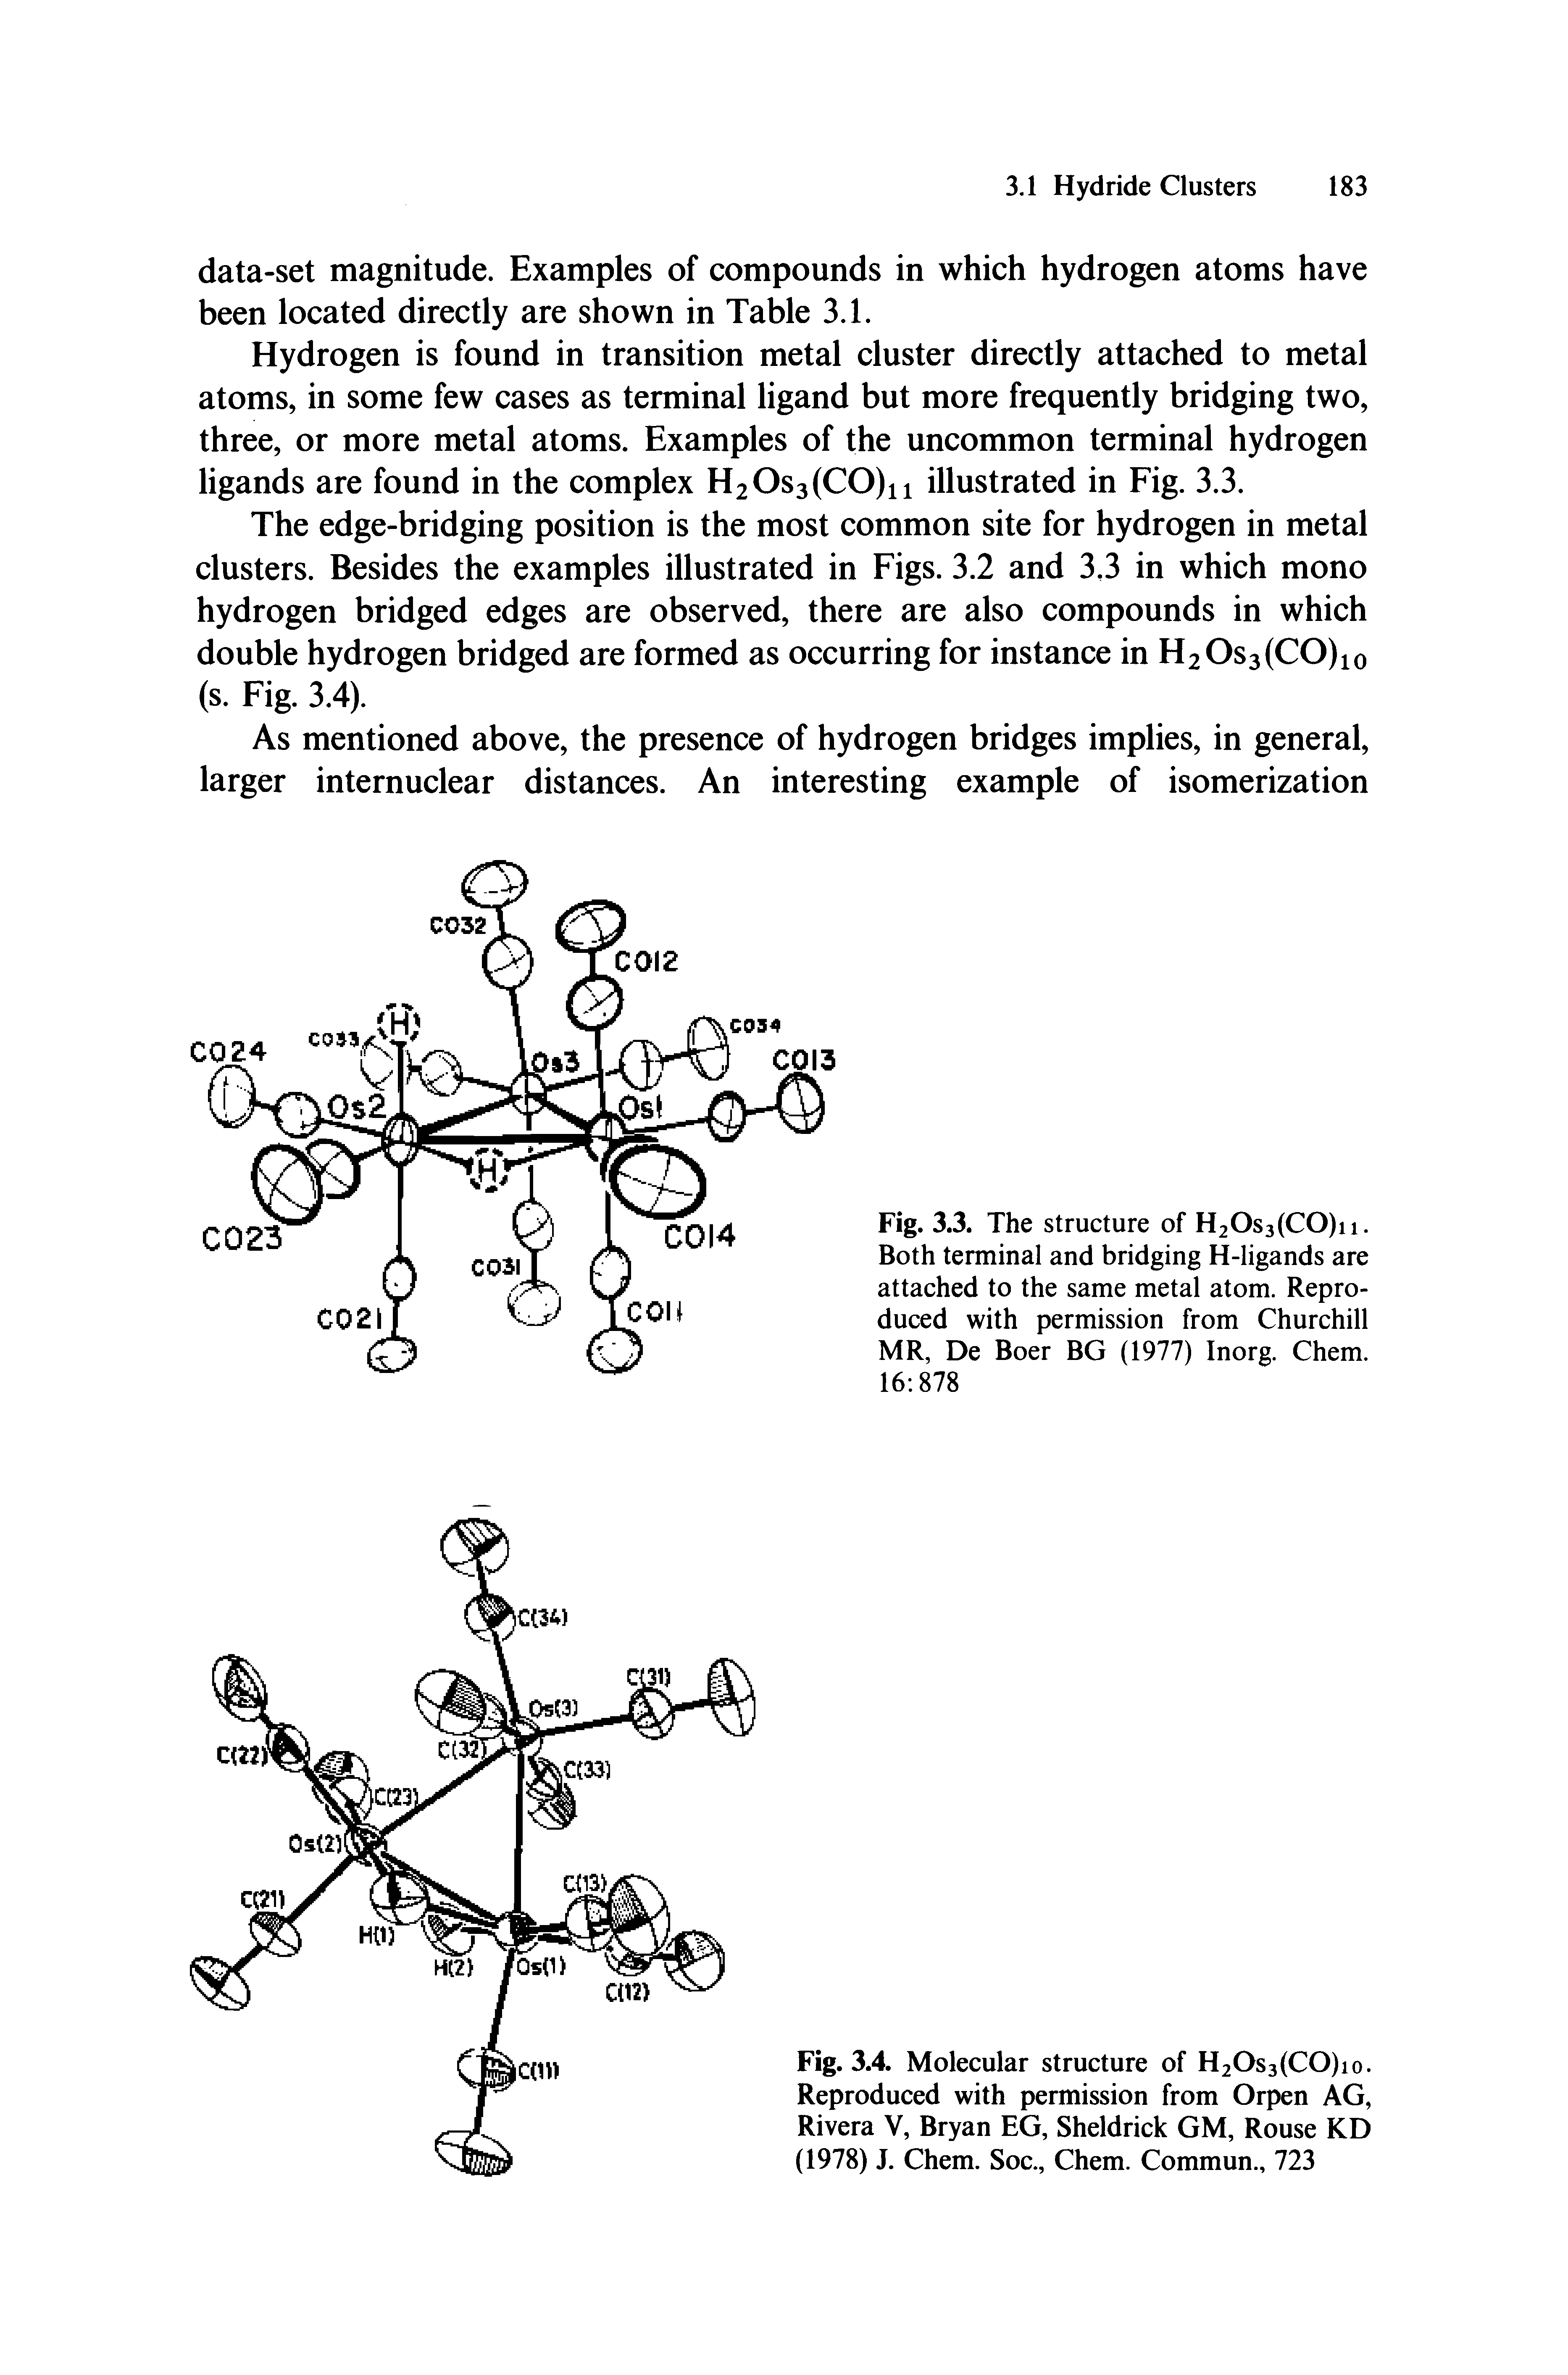 Fig. 3.3. The structure of H20s3(C0)n. Both terminal and bridging H-ligands are attached to the same metal atom. Reproduced with permission from Churchill MR, De Boer BG (1977) Inorg. Chem. 16 878...